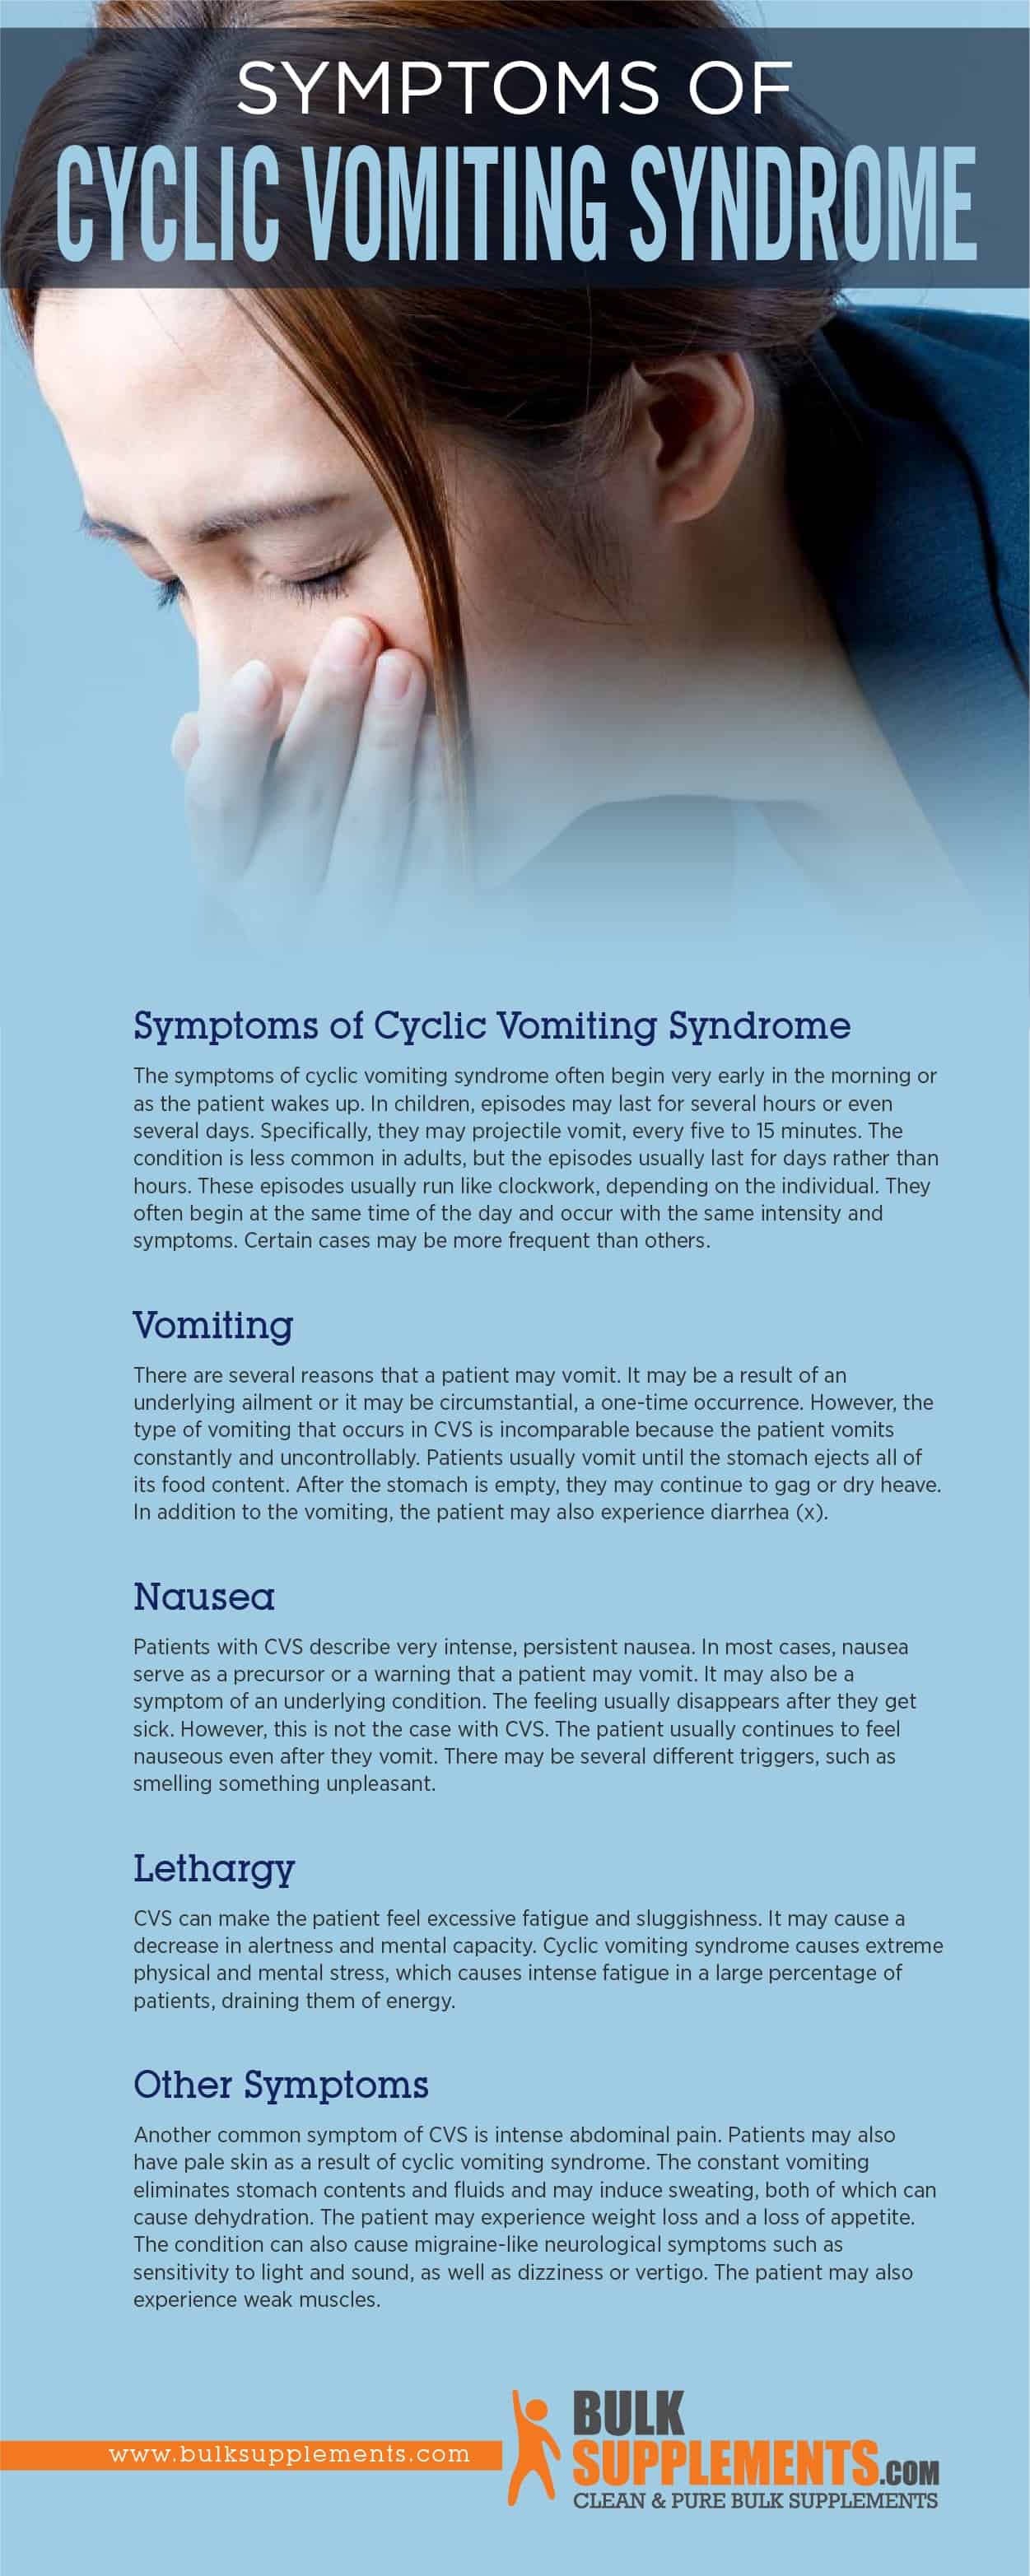 Symptoms of Cyclic Vomiting Syndrome